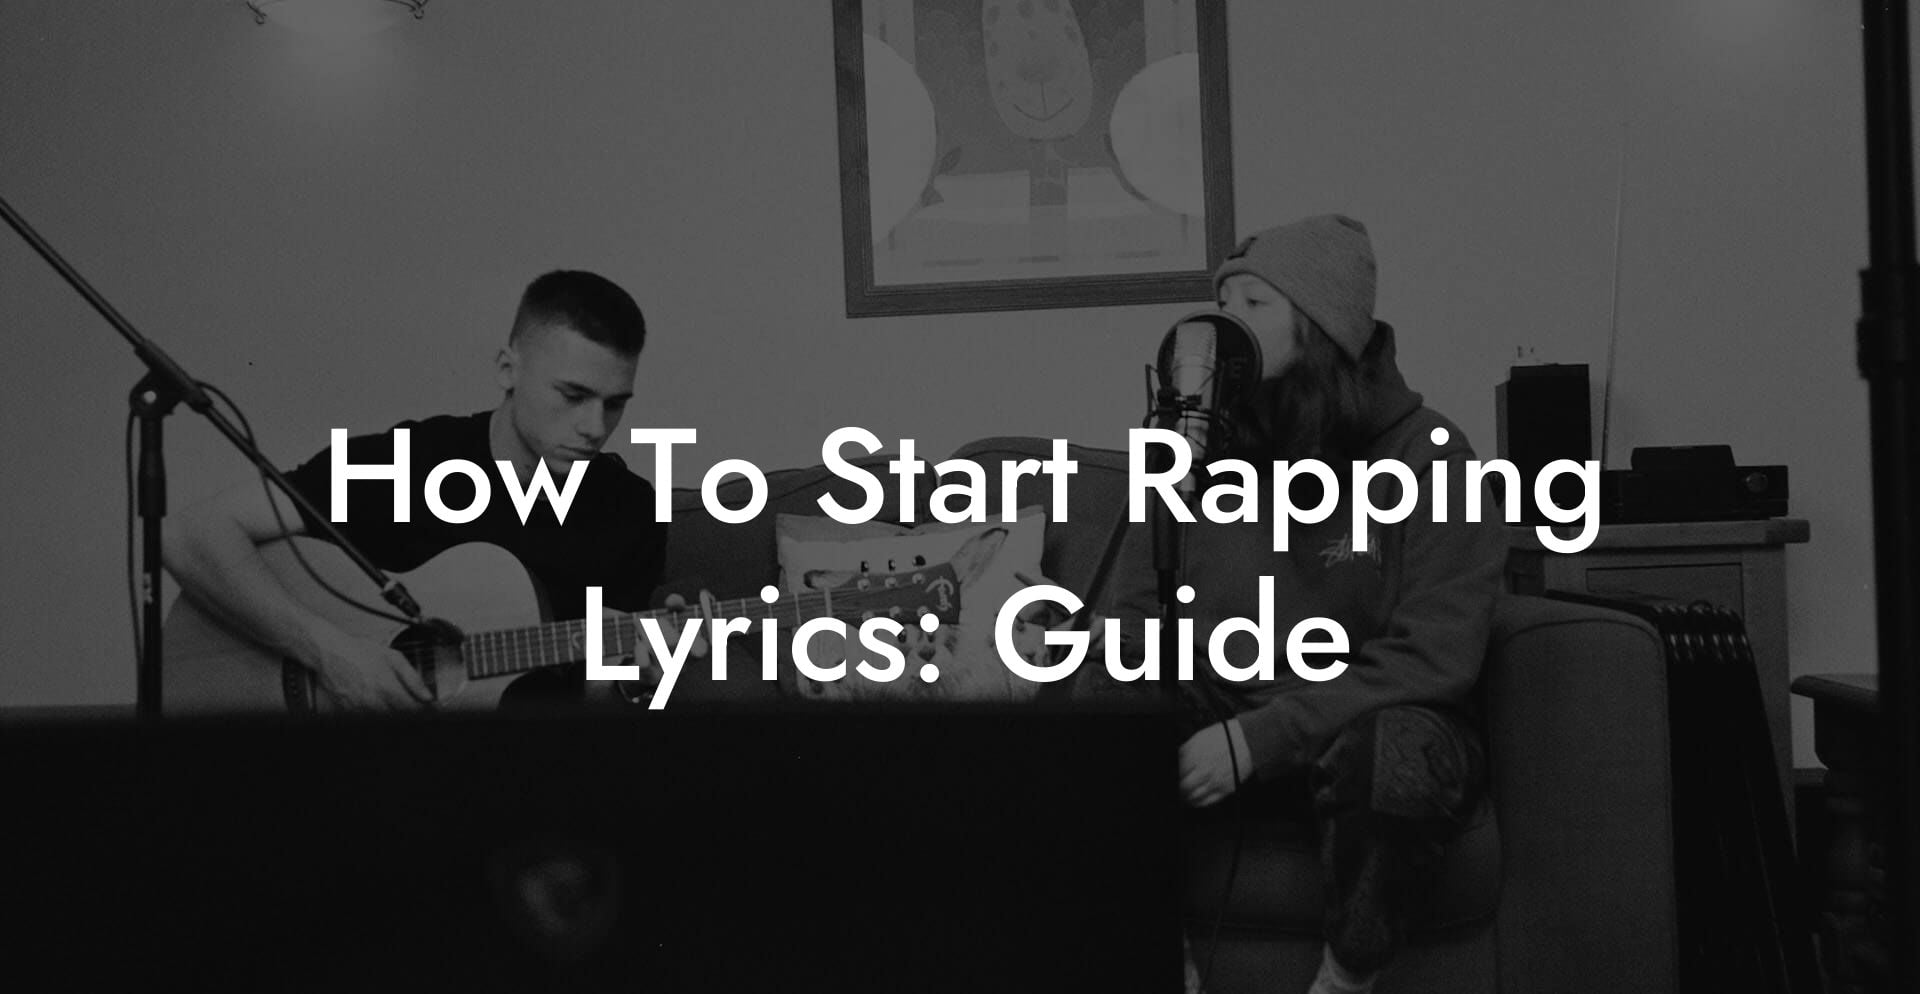 how to start rapping lyrics guide lyric assistant